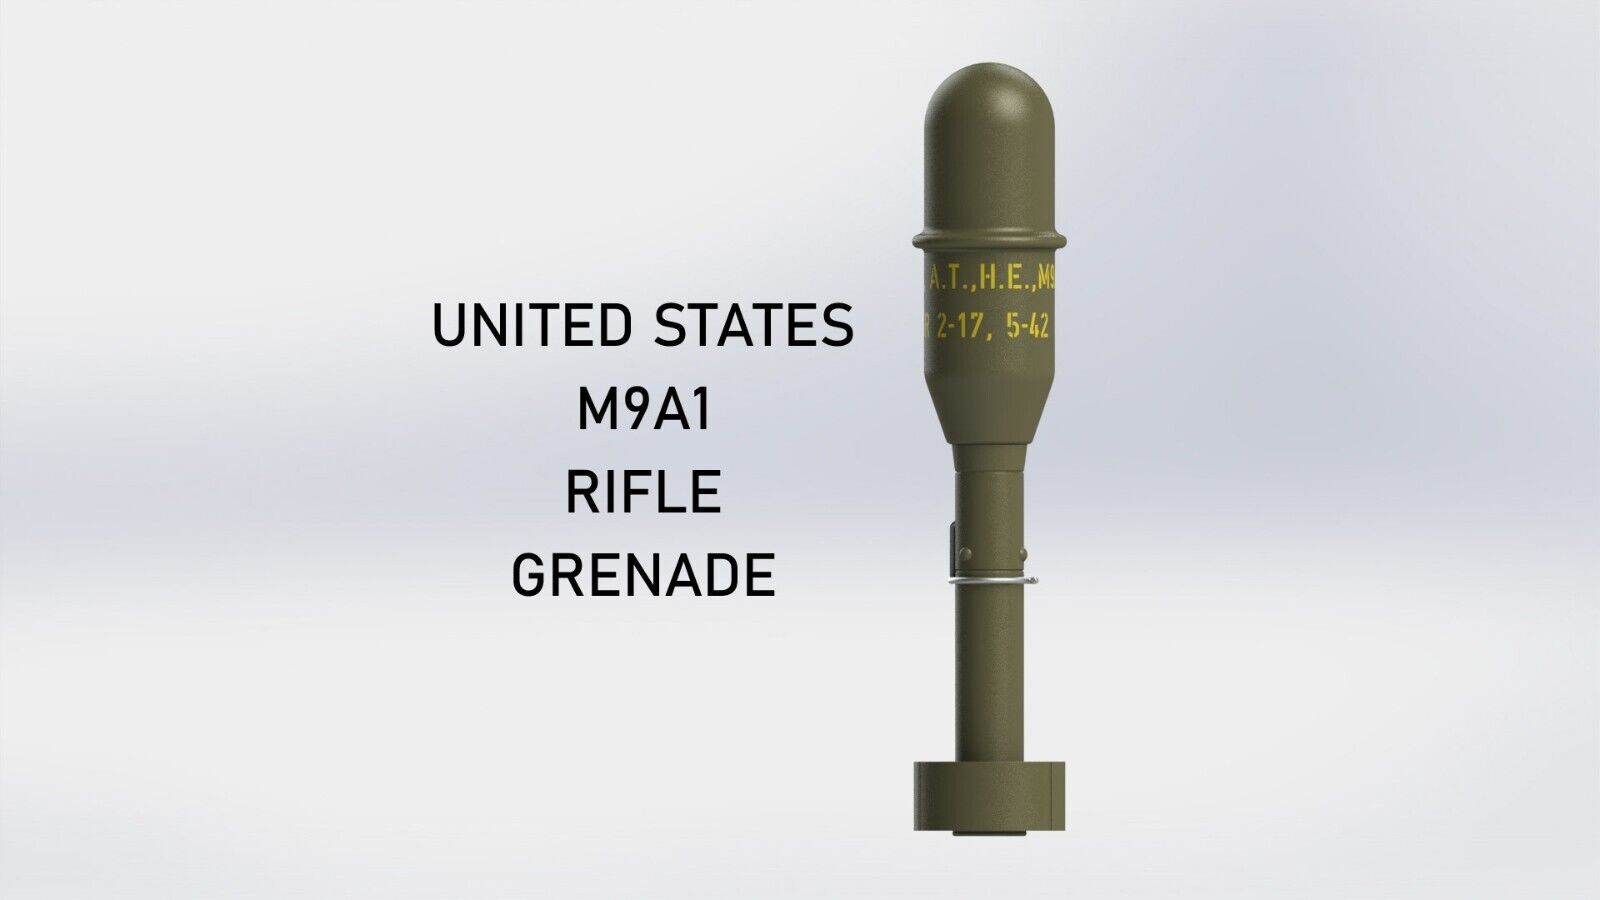 WW2 UNITED STATES M9A1 RIFLE GRENADE made from plastic in correct colors